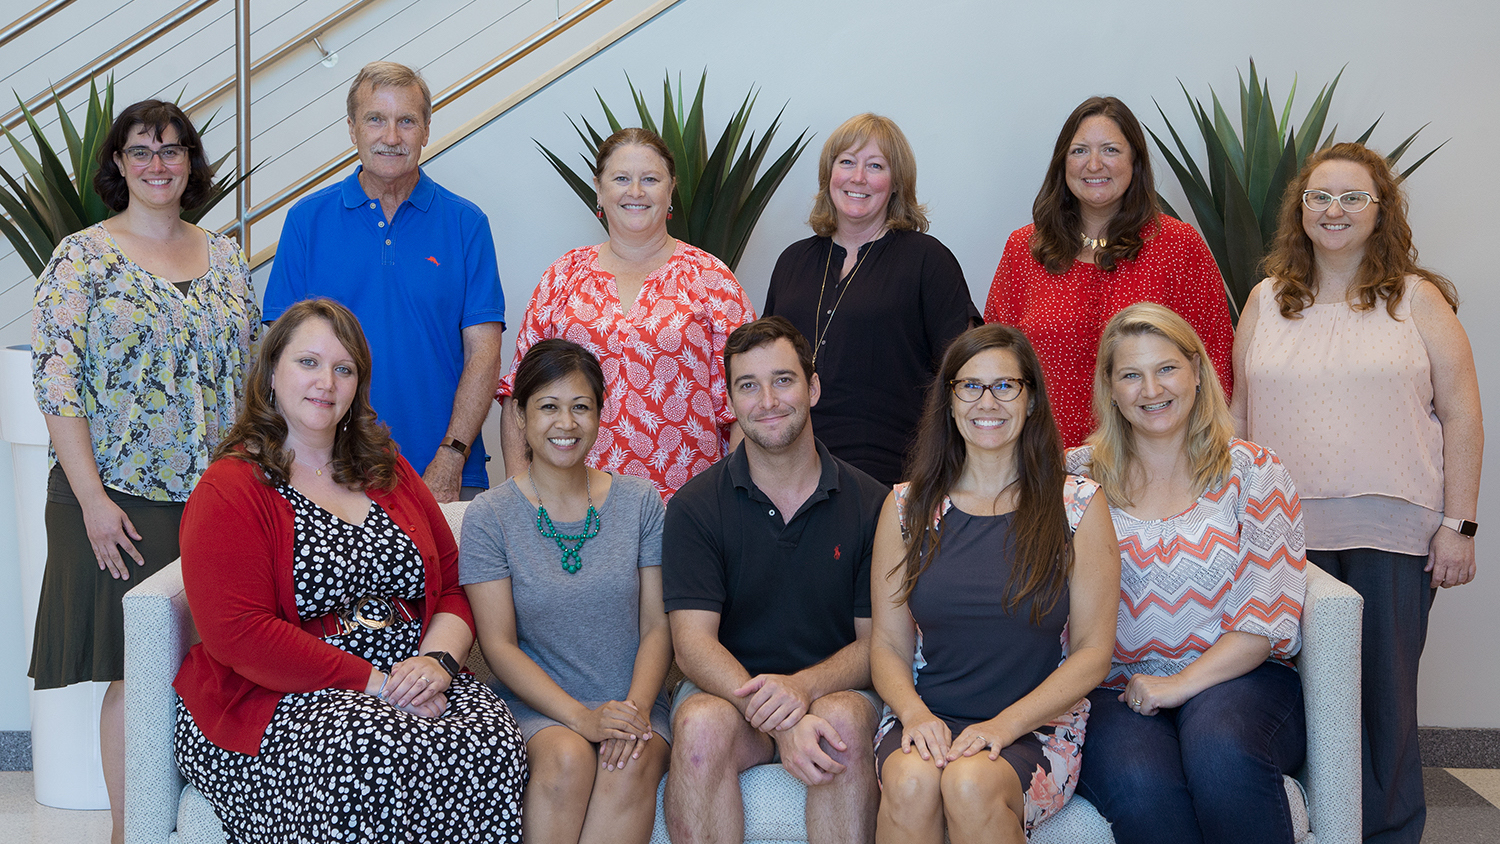 Photo of OCIP team in the CTI lobby. Back row is standing behind the front row who are seated on a couch. Back row, left to right: Molly Fenn, David Shew, Leigh Shamblin, Christine Cranford, Angie Smith, Kim Allen. Front row, left to right: Bethany Smith, Arelene Mendoza-Moran, Christopher Beeson, Bethanne Tobey, Rebecca Sanchez. Photo by Katie Harris.